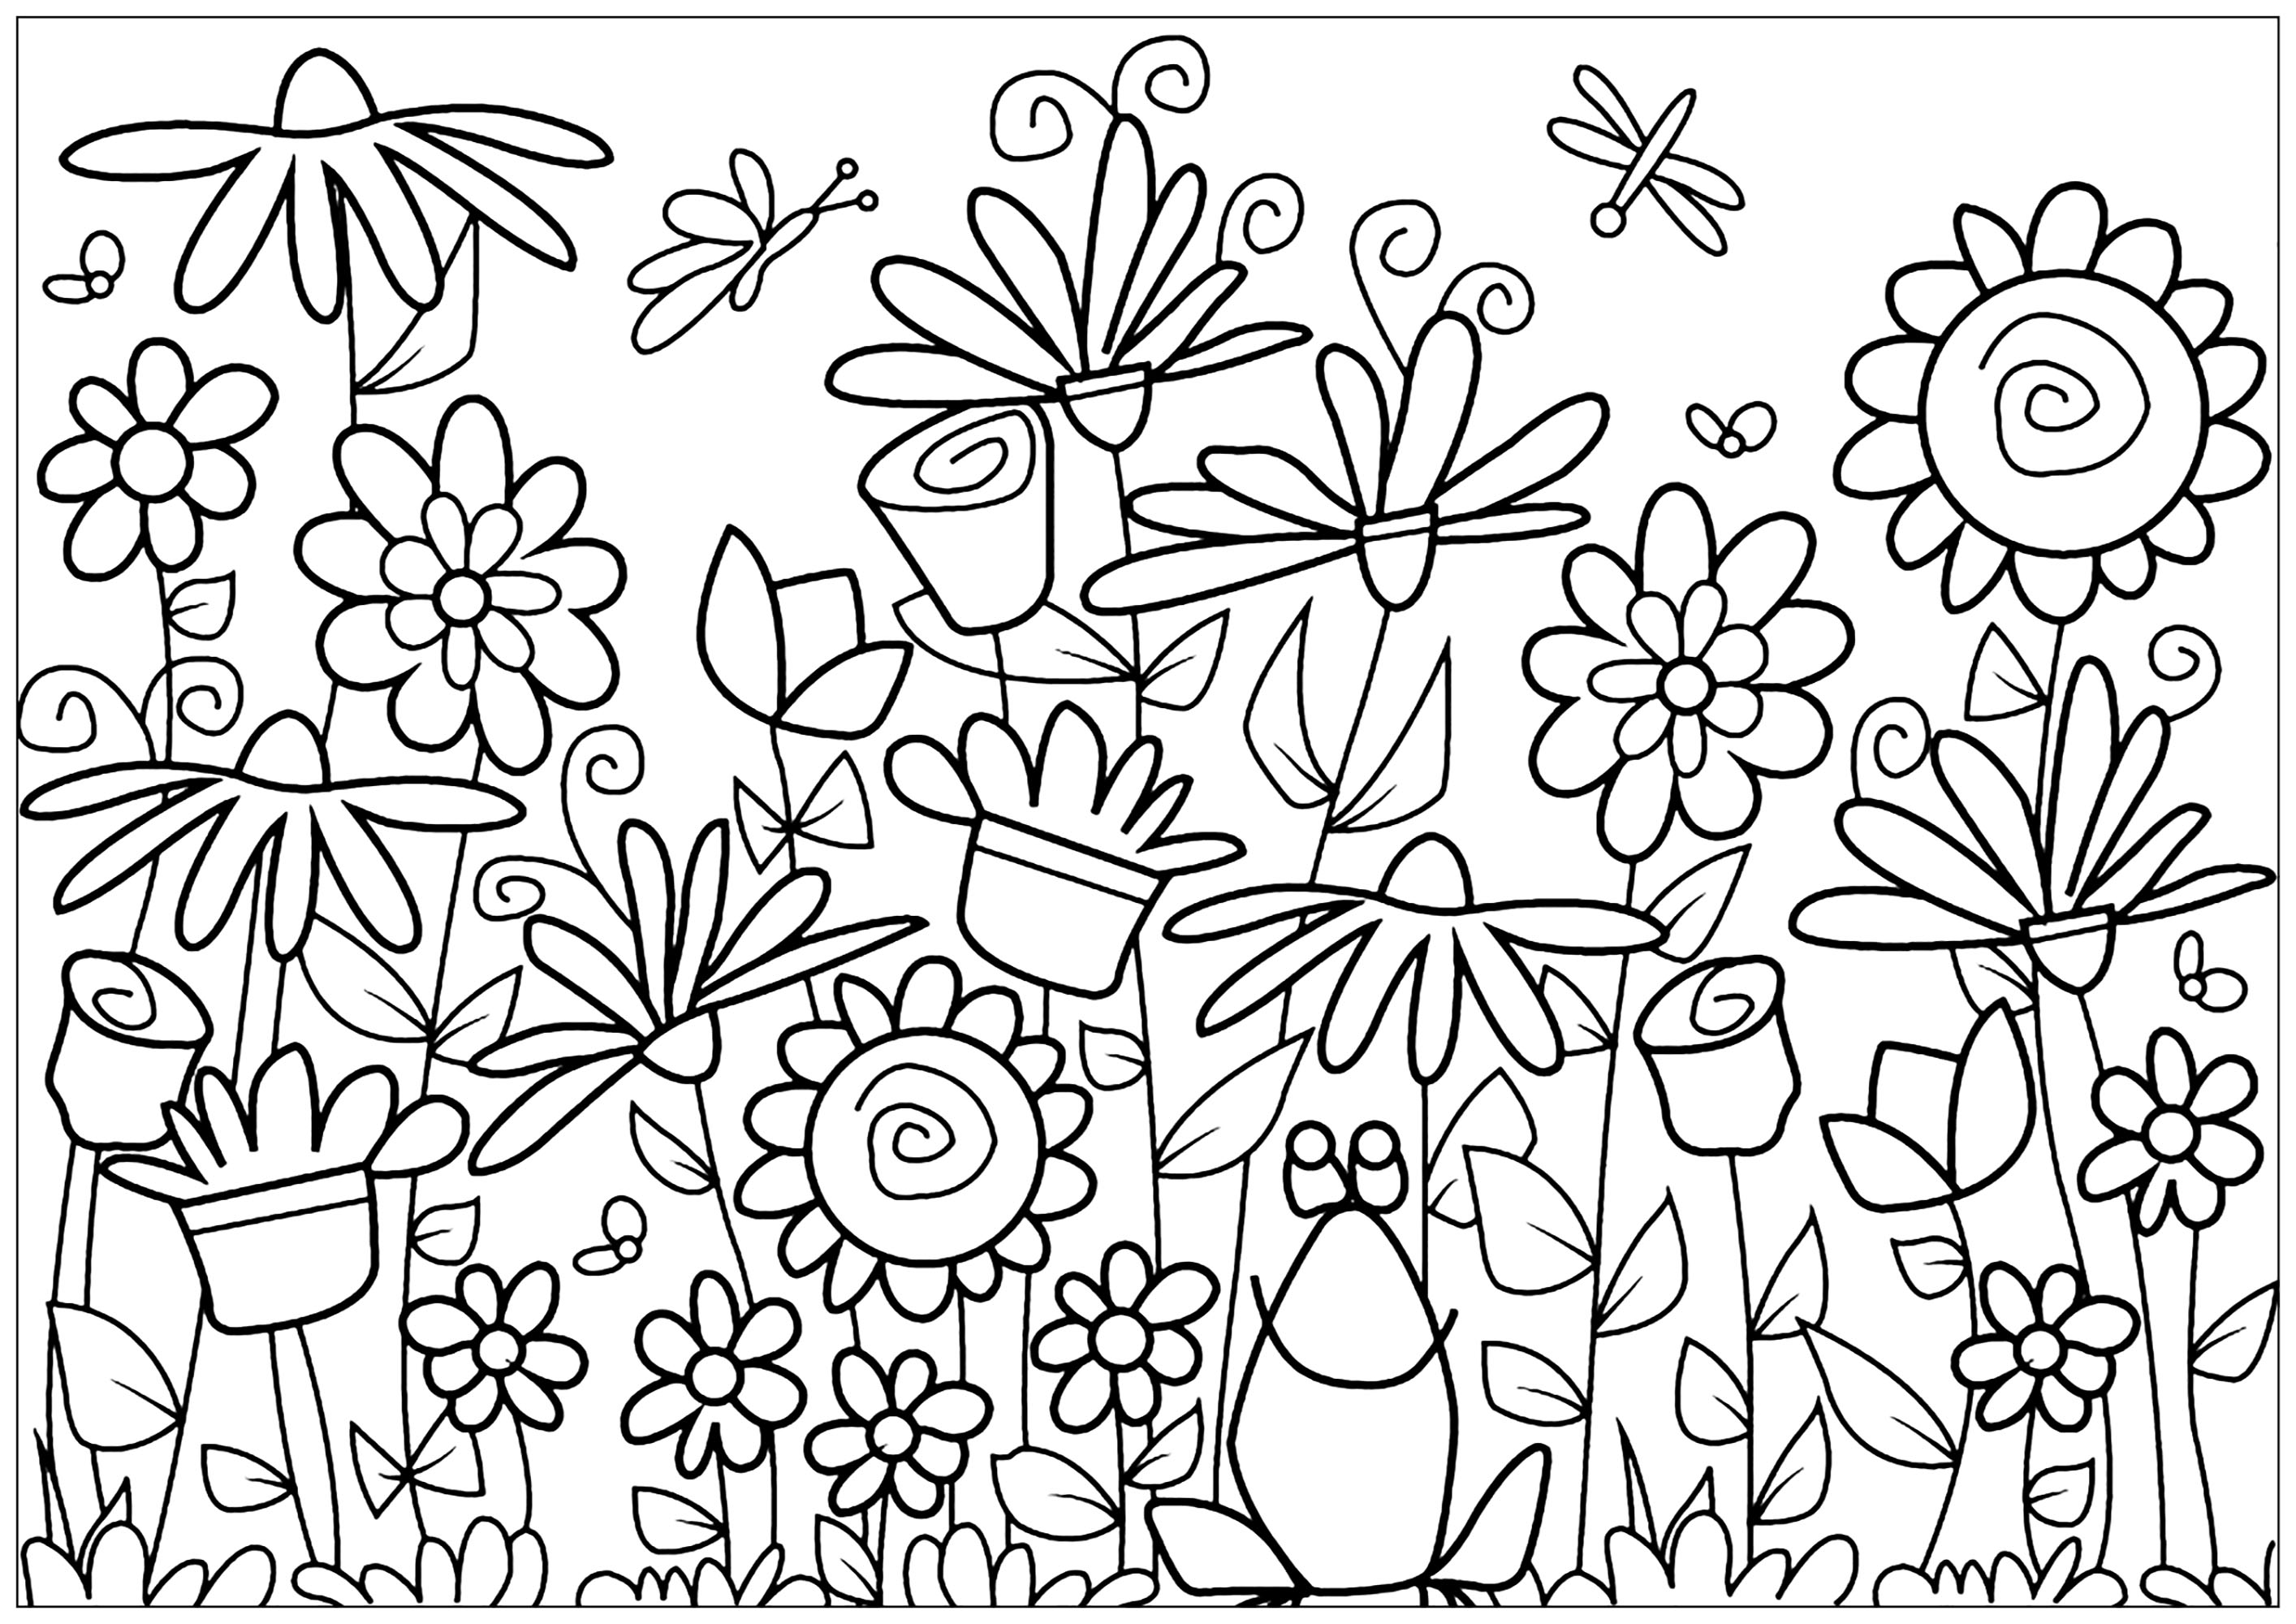 Coloring page with giant sunflowers, butterflies, daisies and tulips surrounding a frog, Artist : Lucie